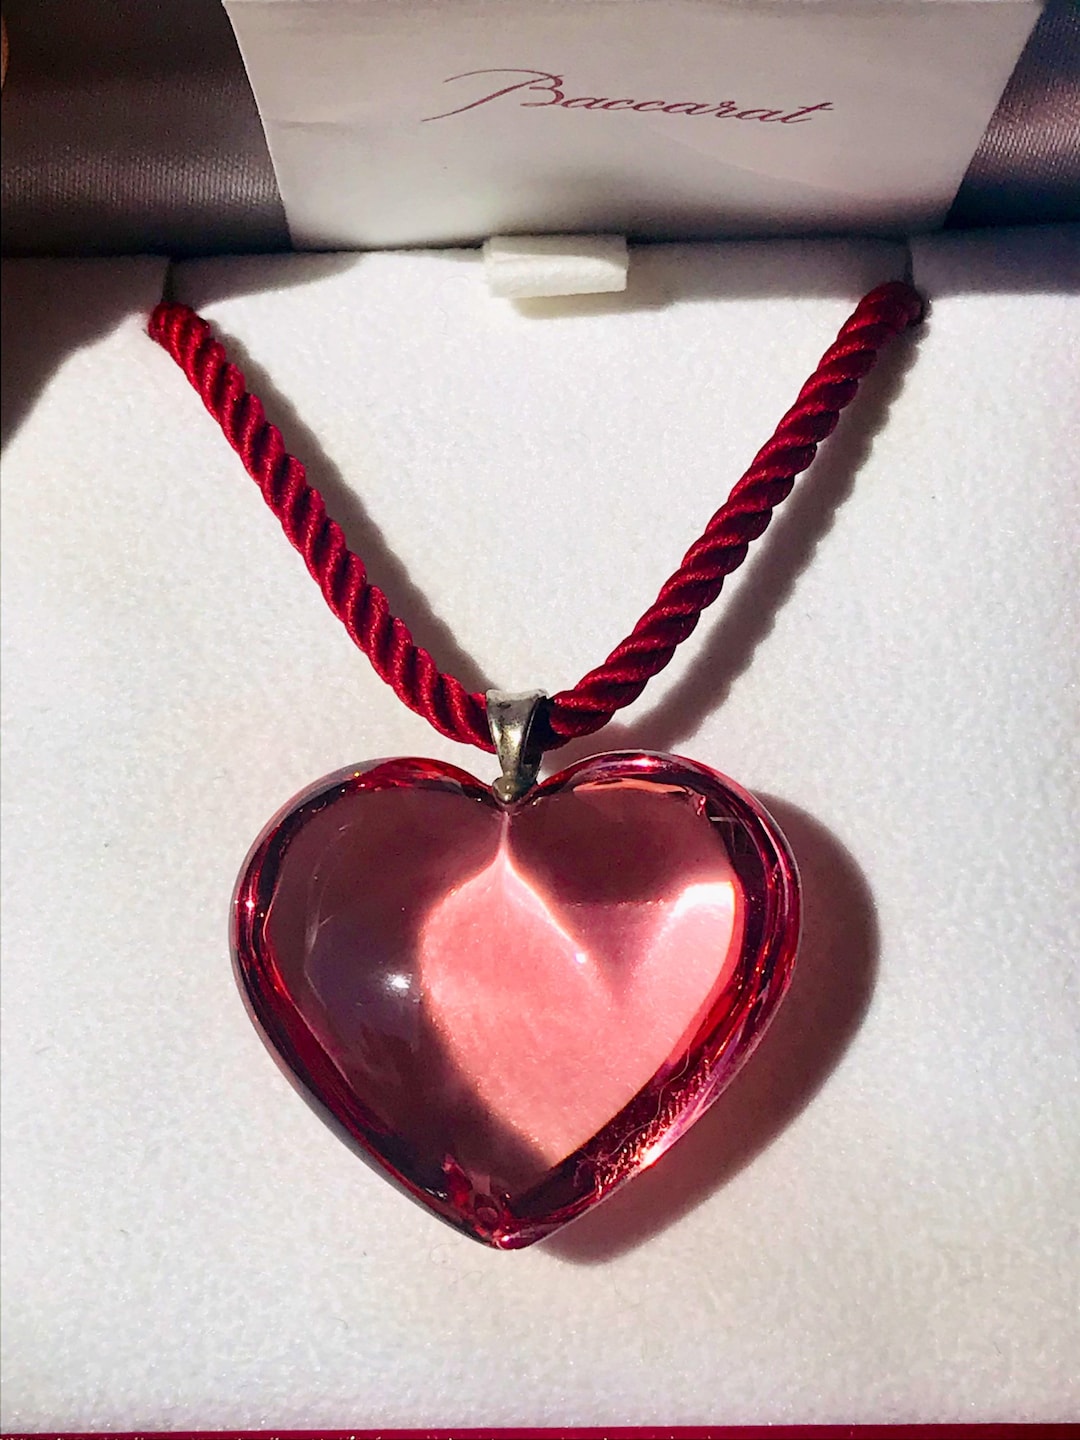 Very RARE Baccarat Glamour Pink Heart Pendant, Vintage Crystal Baccarat ...